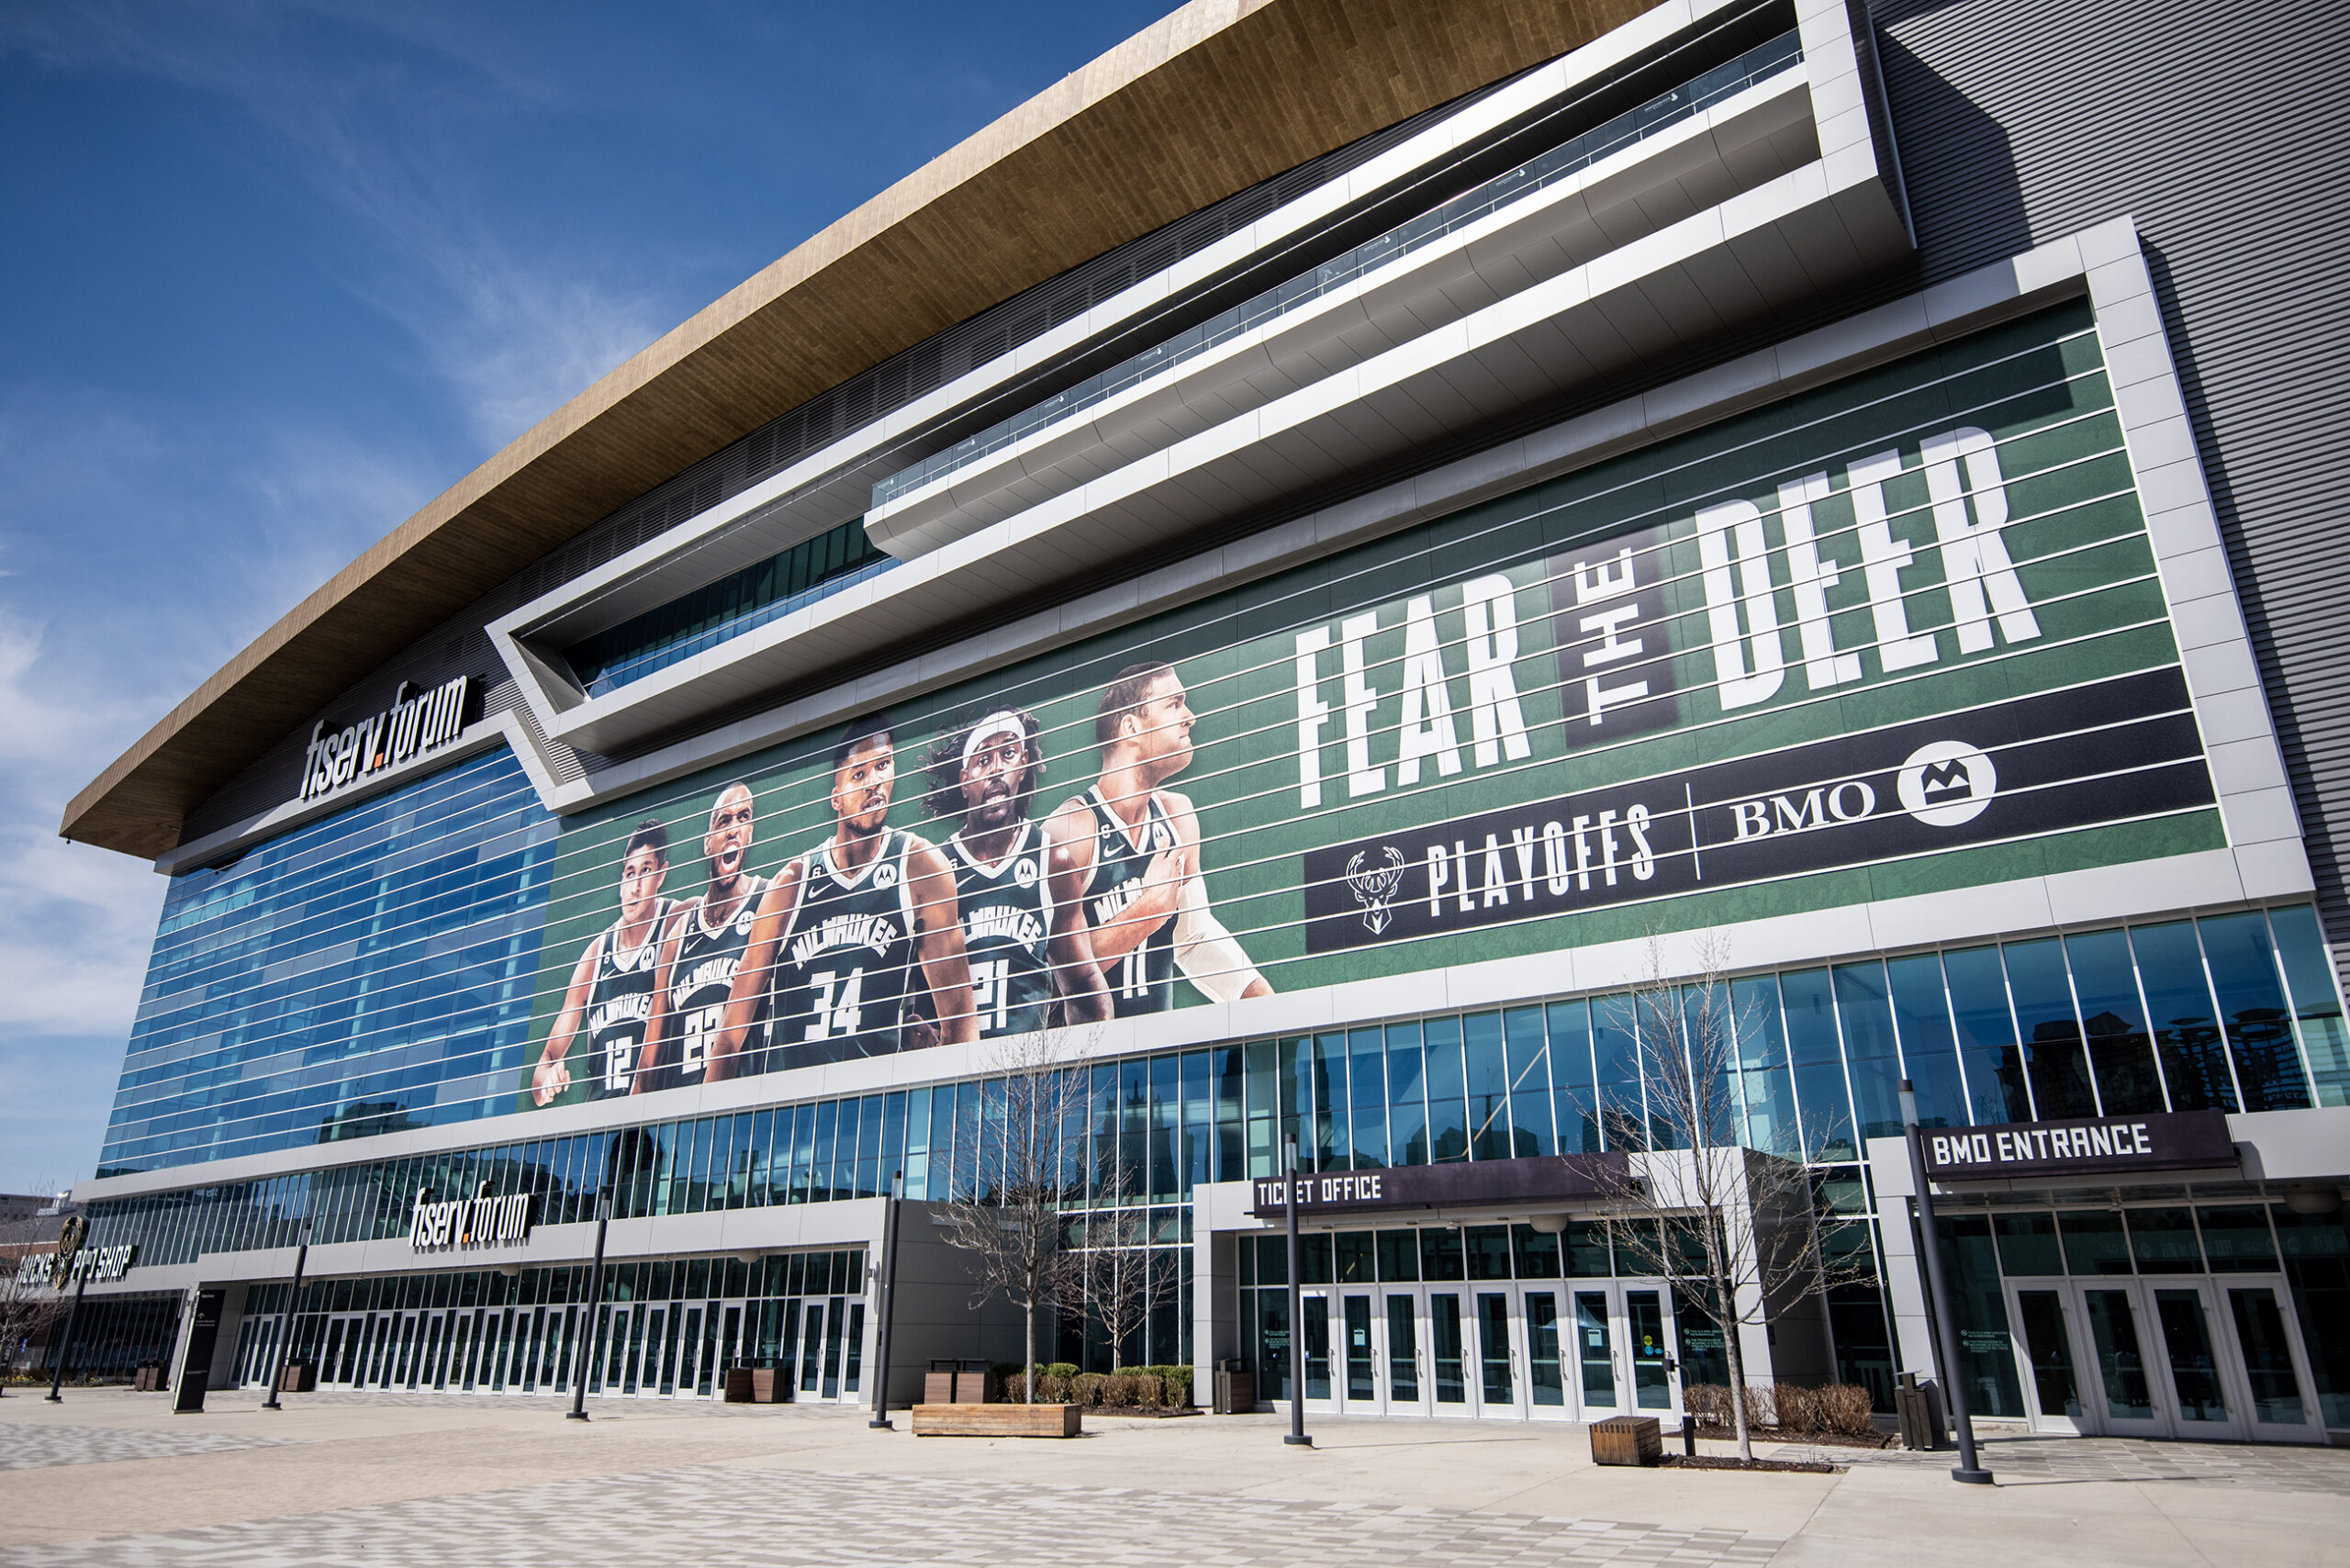 A blue sky is seen behind the curved roof of the Fiserv Forum. Images of 5 players next to the phrase 